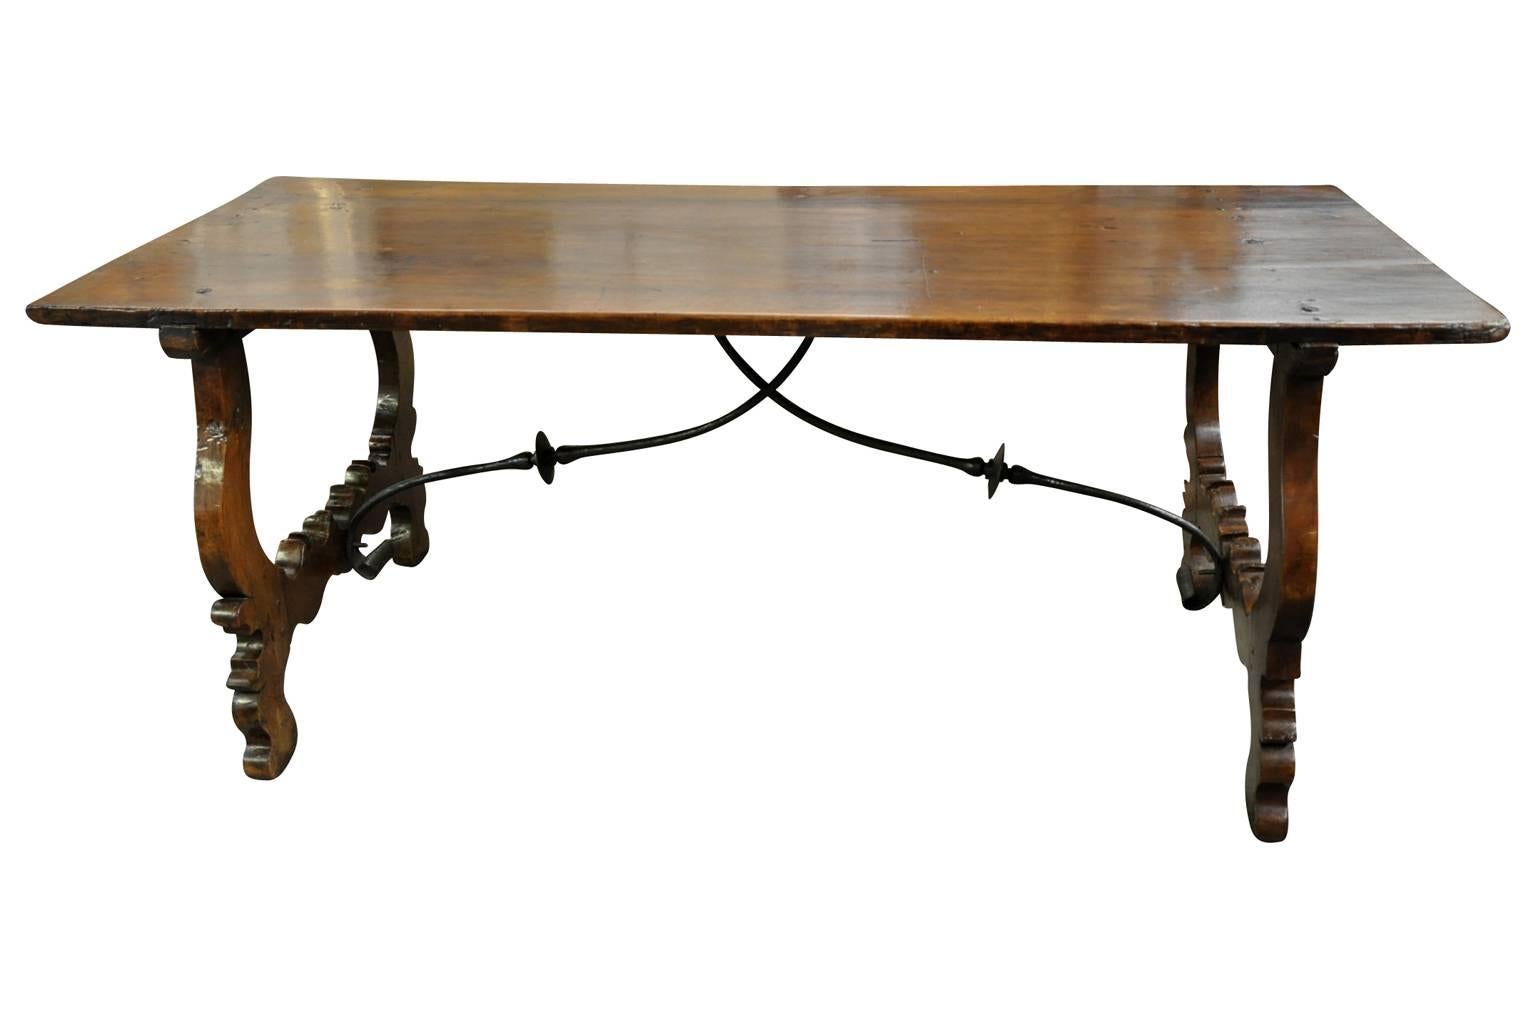 A very beautiful 18th century dining table from Spain. Masterfully constructed from stunning walnut and hand-forged iron stretchers, classical lyre shaped legs. Wonderful patina. Terrific not only as a dining table, but will serve beautifully as a